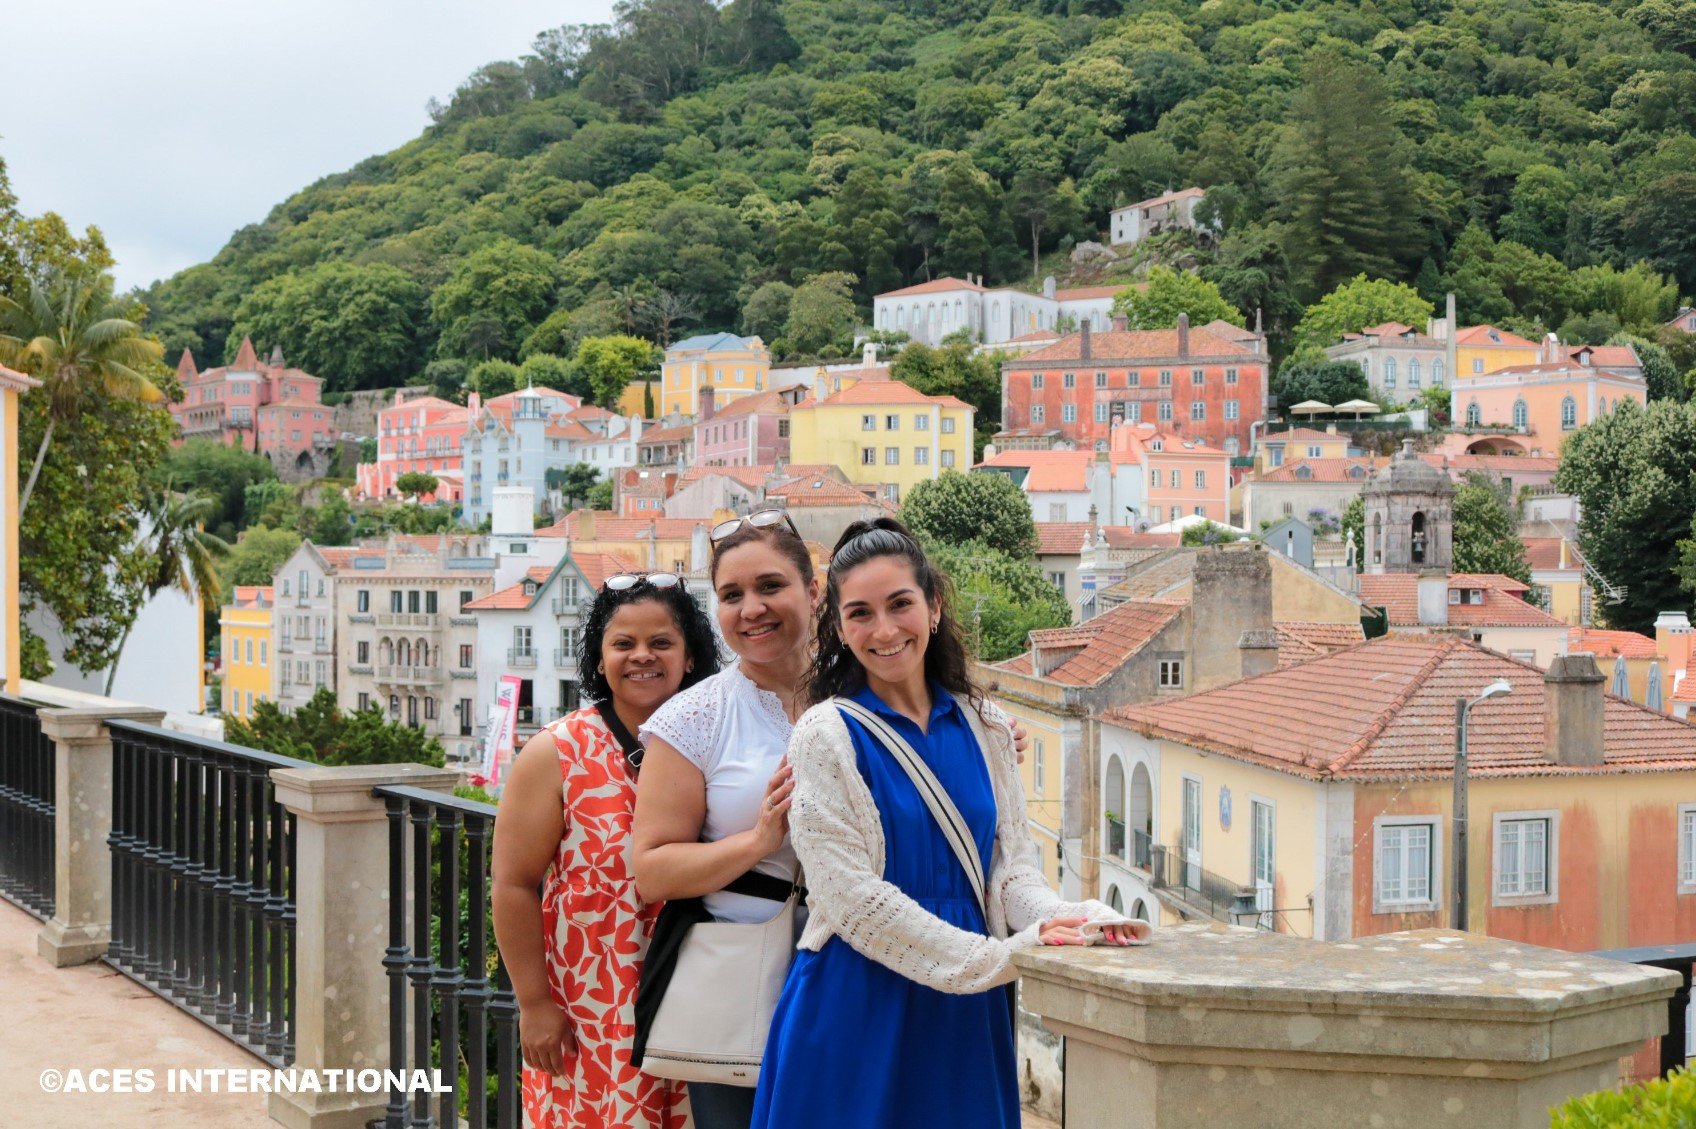 Three Educators Field Study group members take a picture in front of a coastal town in Portugal.